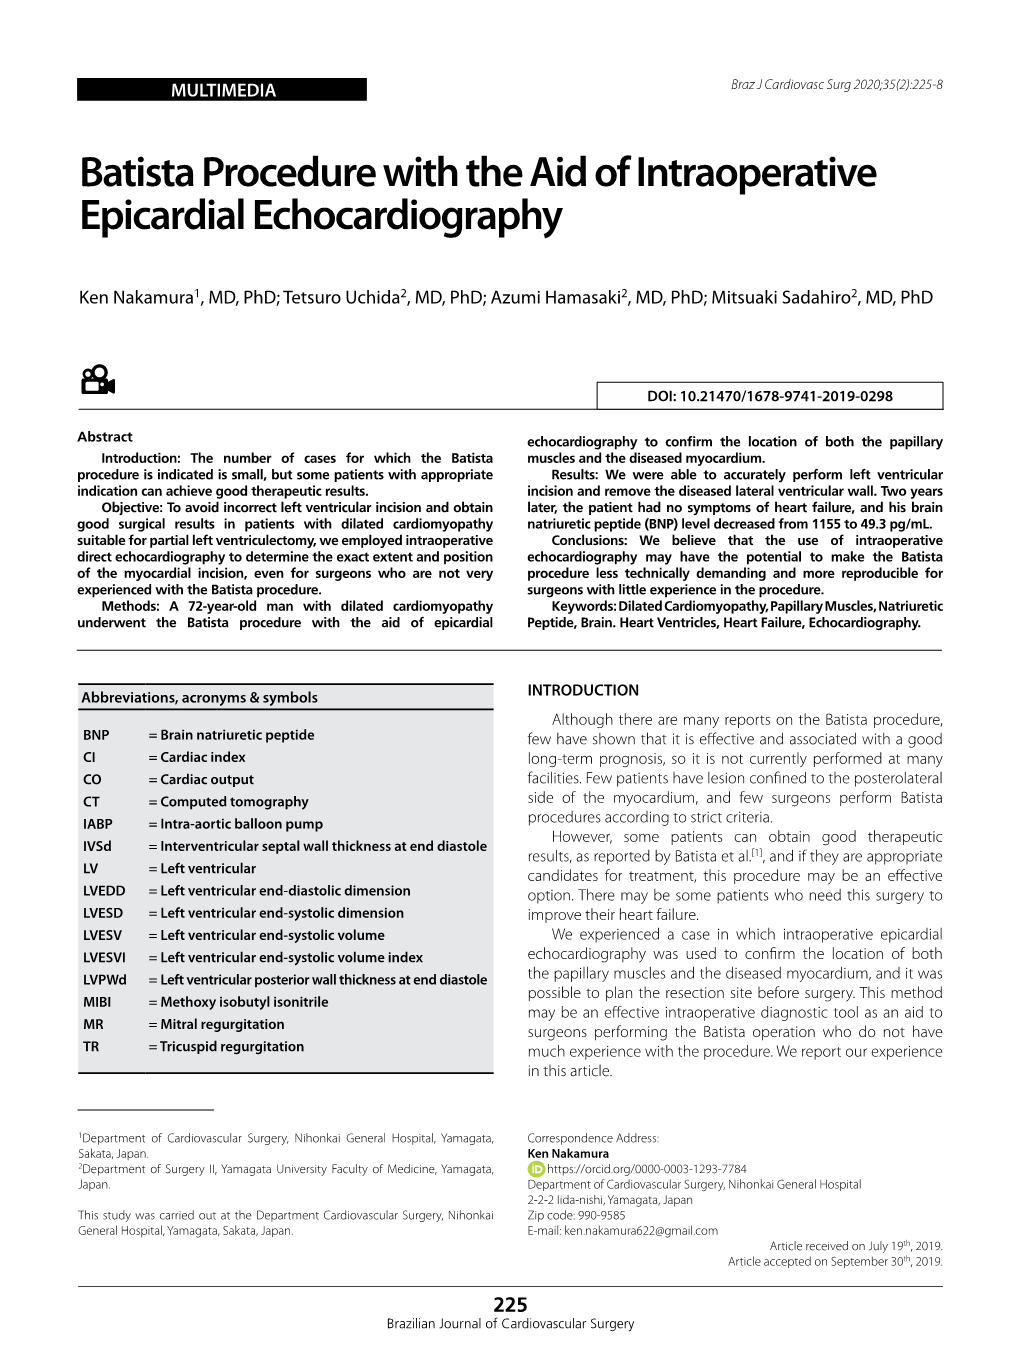 Batista Procedure with the Aid of Intraoperative Epicardial Echocardiography